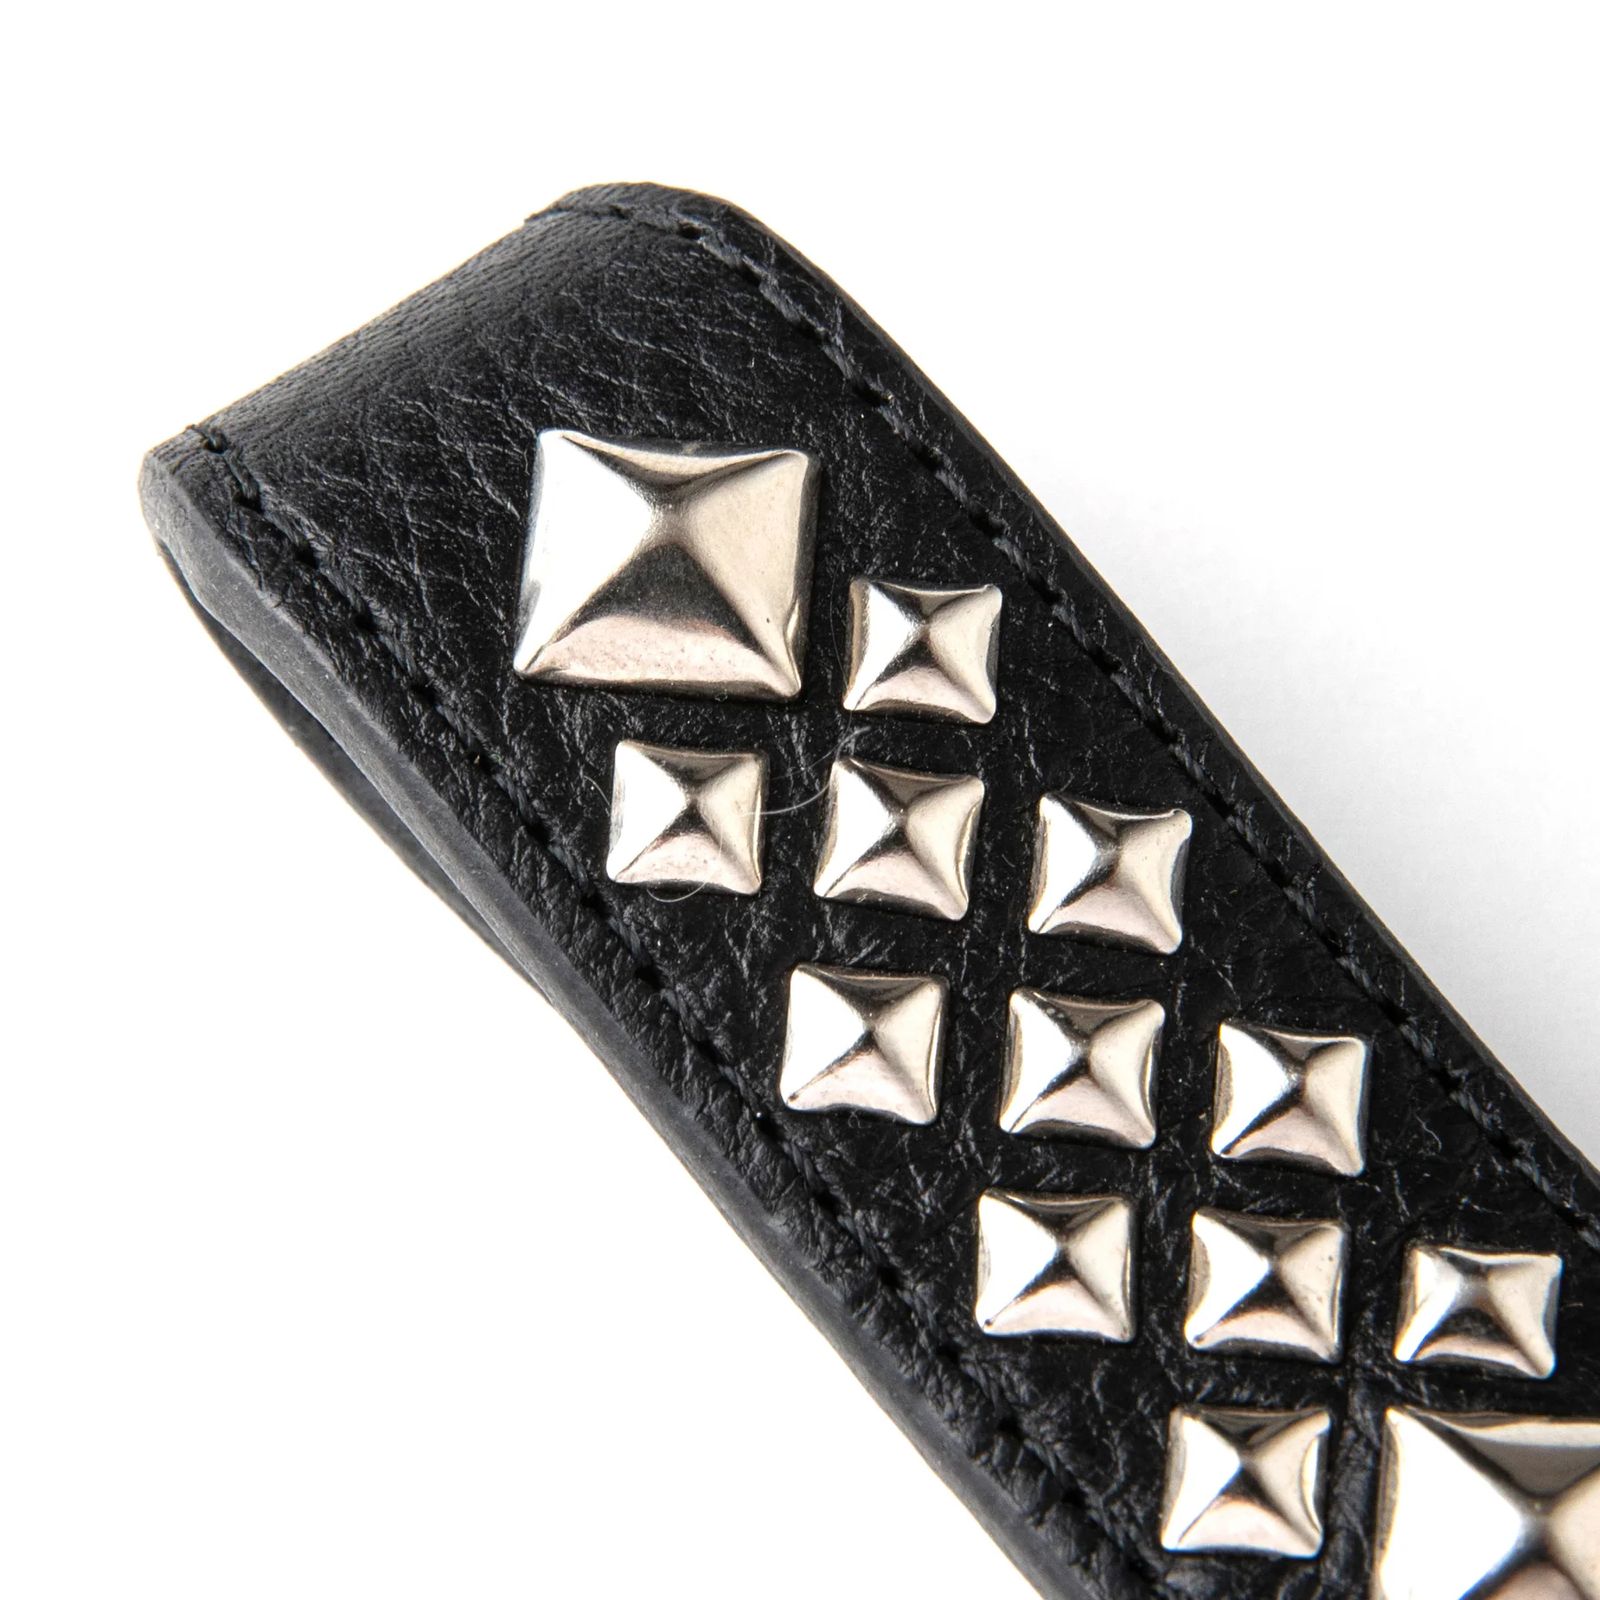 CALEE - STUDS LEATHER SNAP KEY RING (BLACK) / スタッズ レザー 